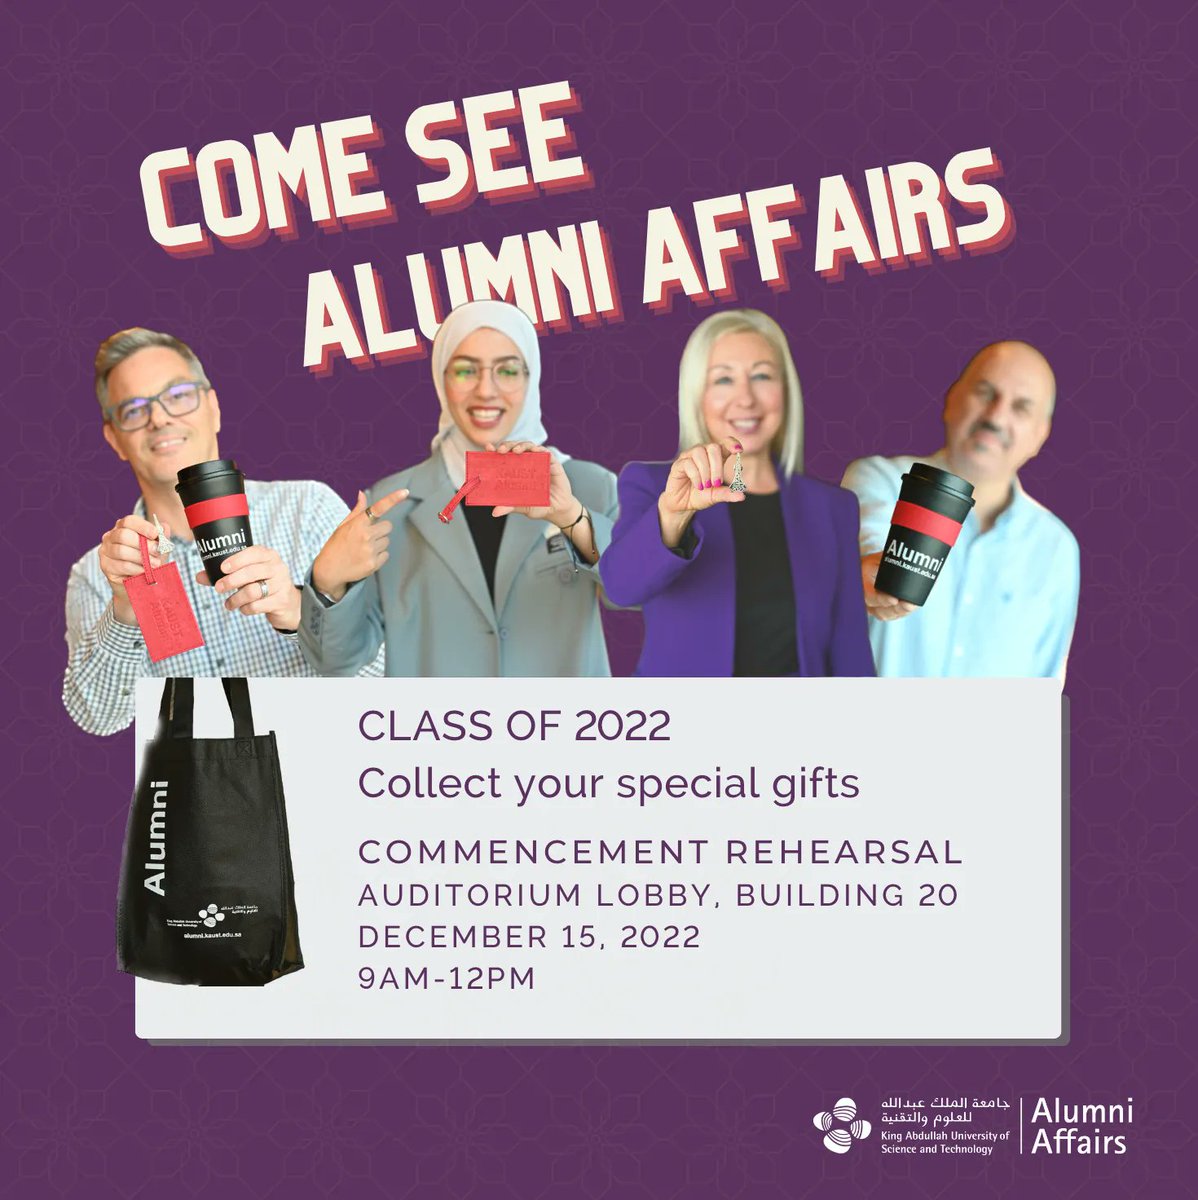 The Alumni Affairs team looks forward to meeting our graduating Class of 2022 at Commencement rehearsal this Thursday. Come say hello and collect your graduation gift bag, which includes the very special Class of 2022 Beacon pin #KAUST_alumni #Classof2022